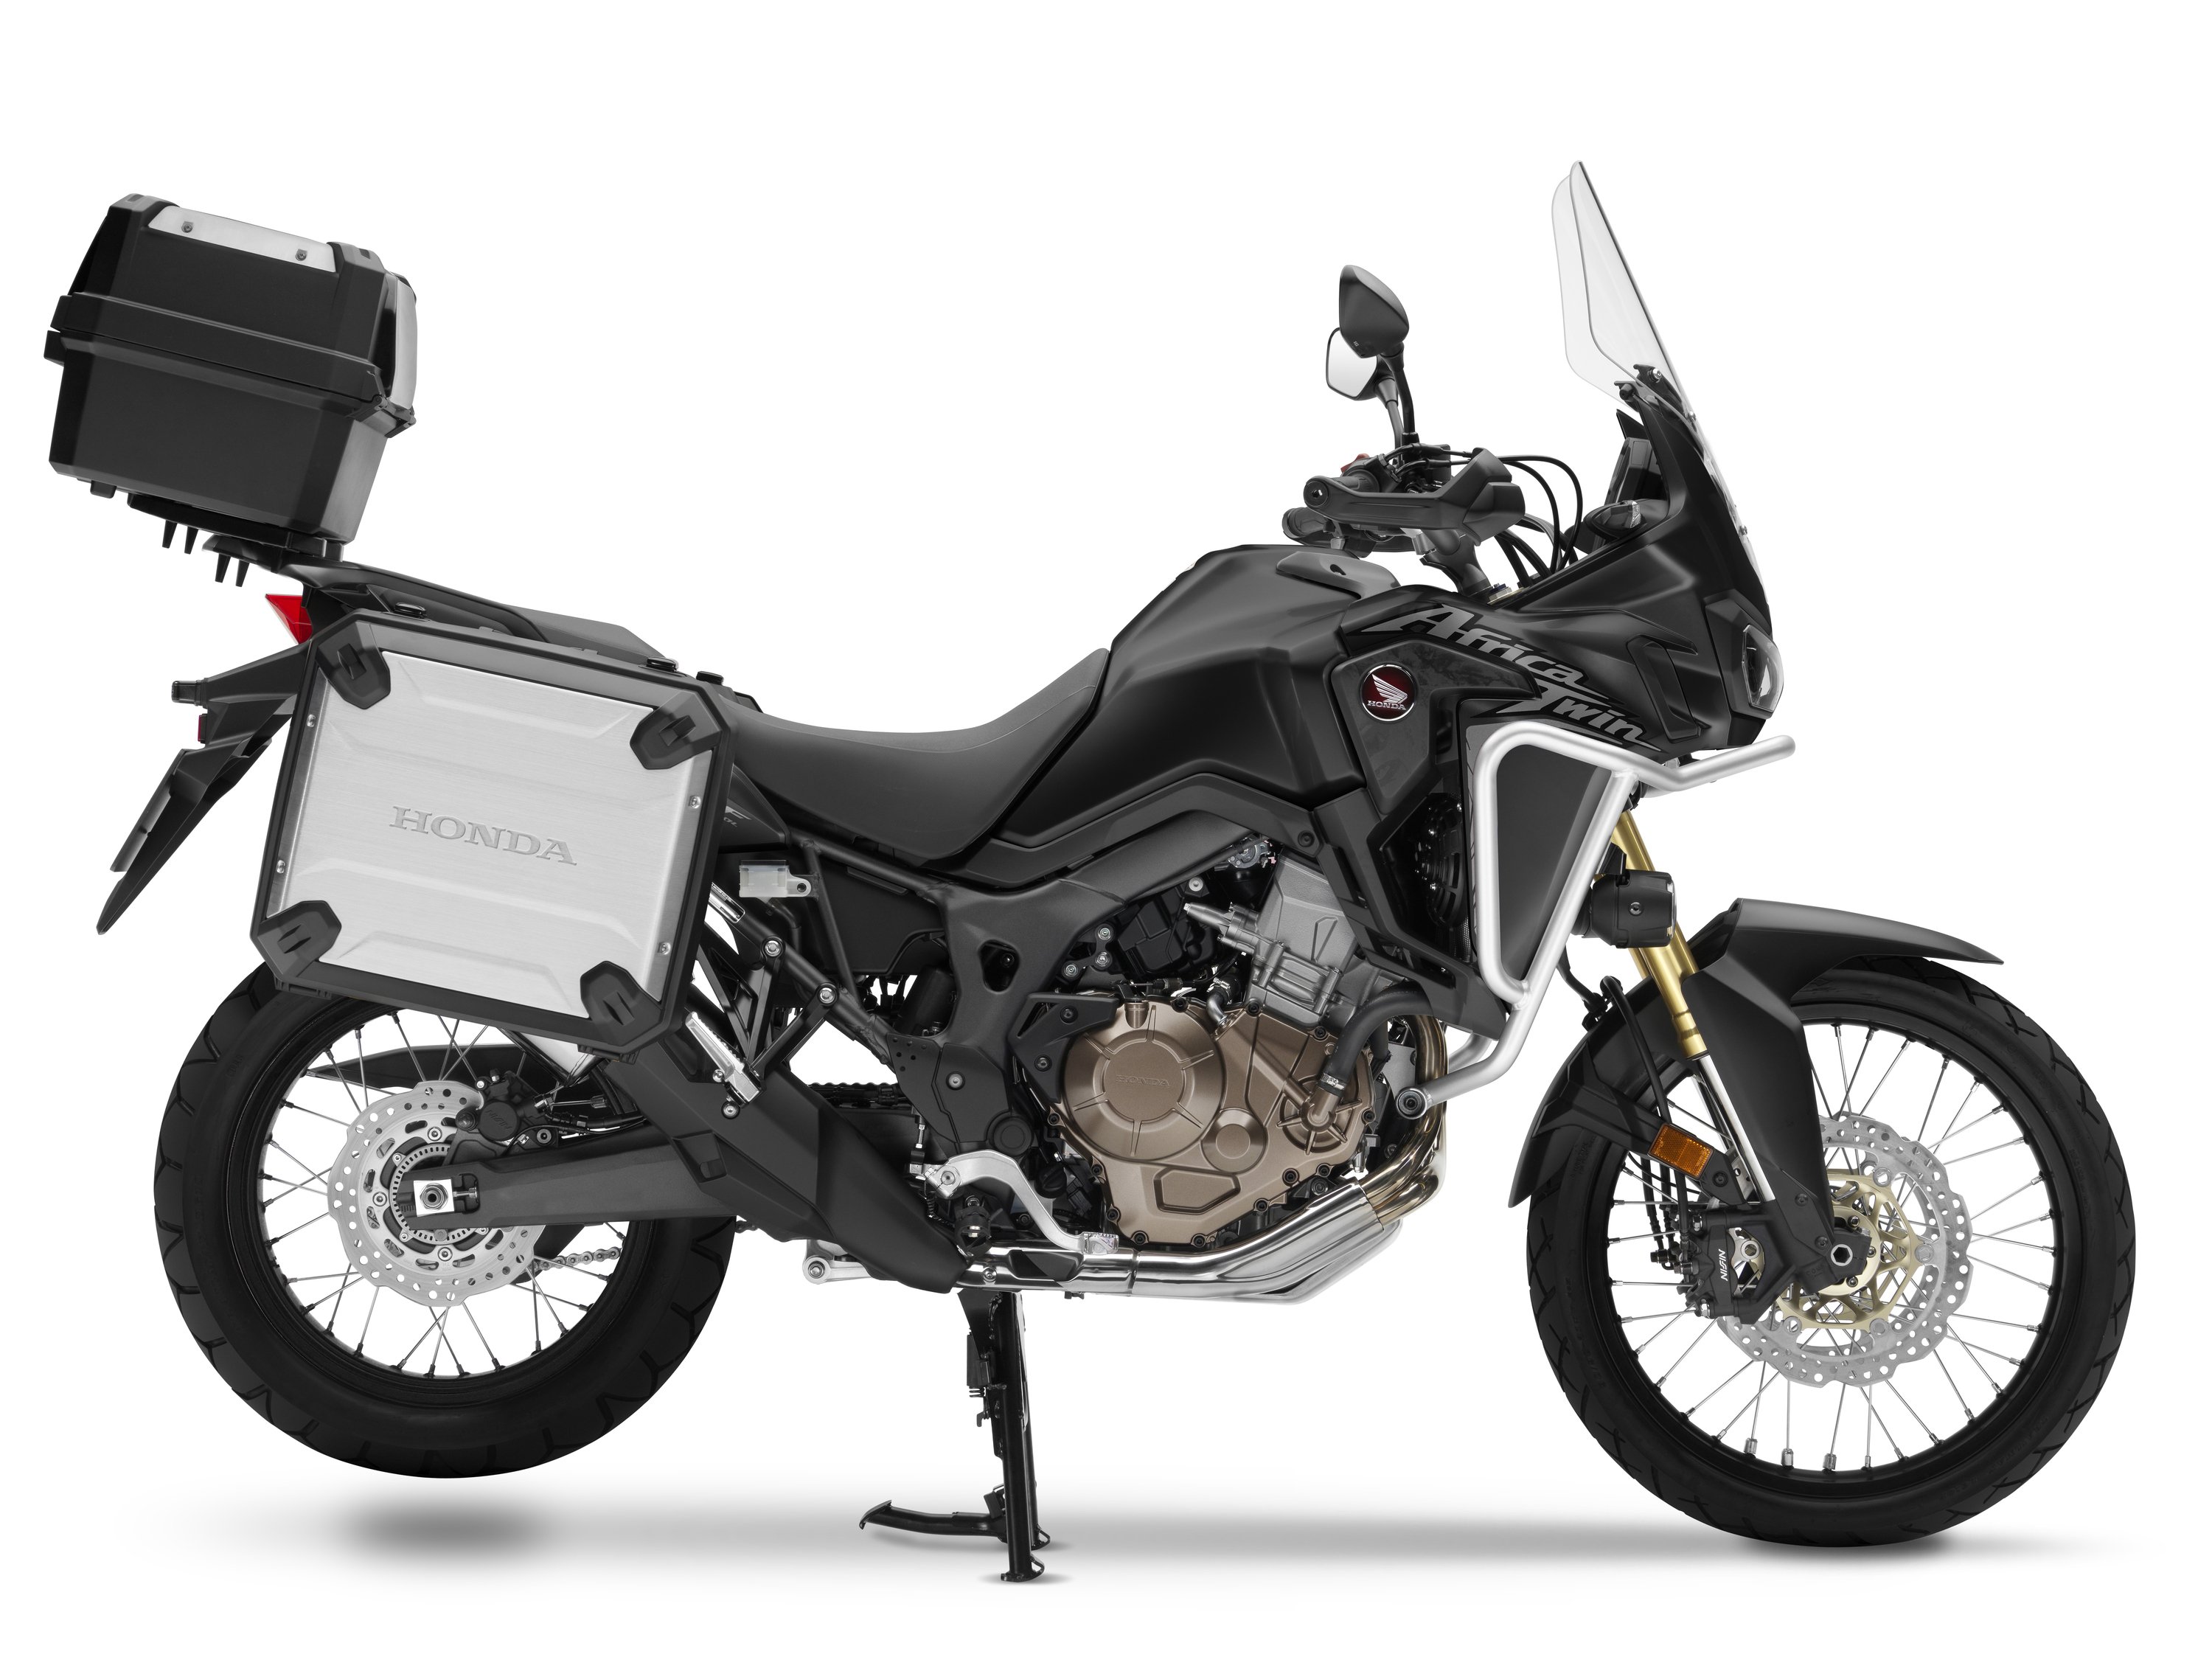 Honda Africa Twin CRF 1000L Africa Twin CRF 1000L Travel Edition (2018 - 19)